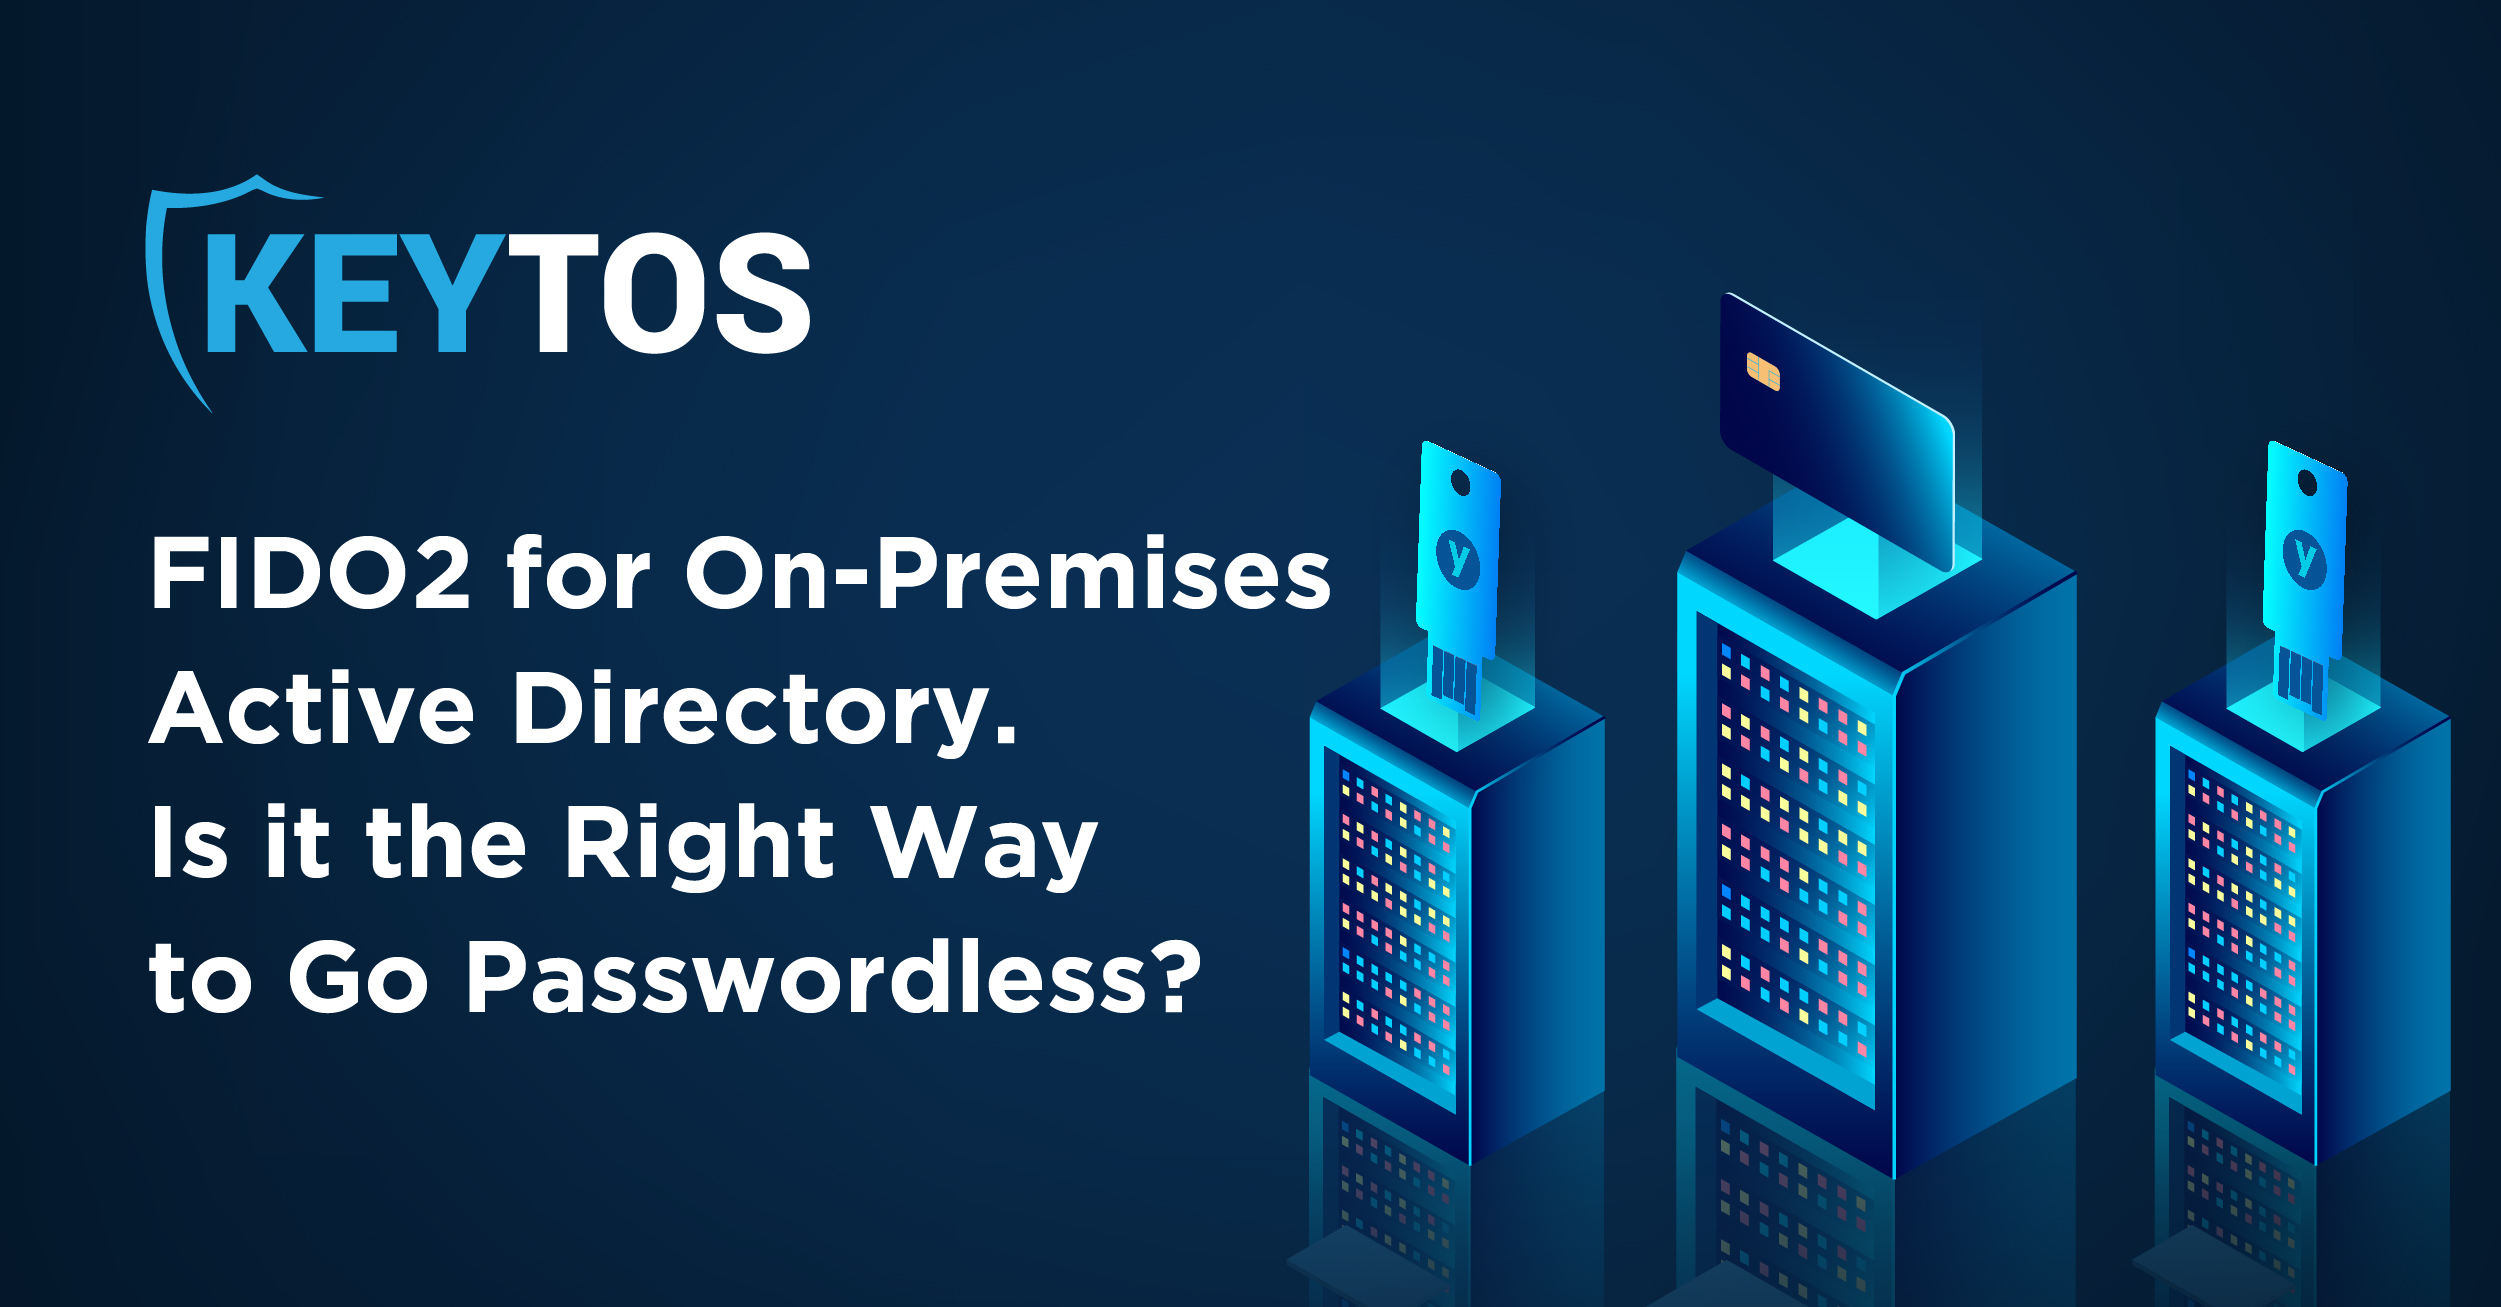 Best practices for going passwordless on-premises use FIDO2 or SmartCard?